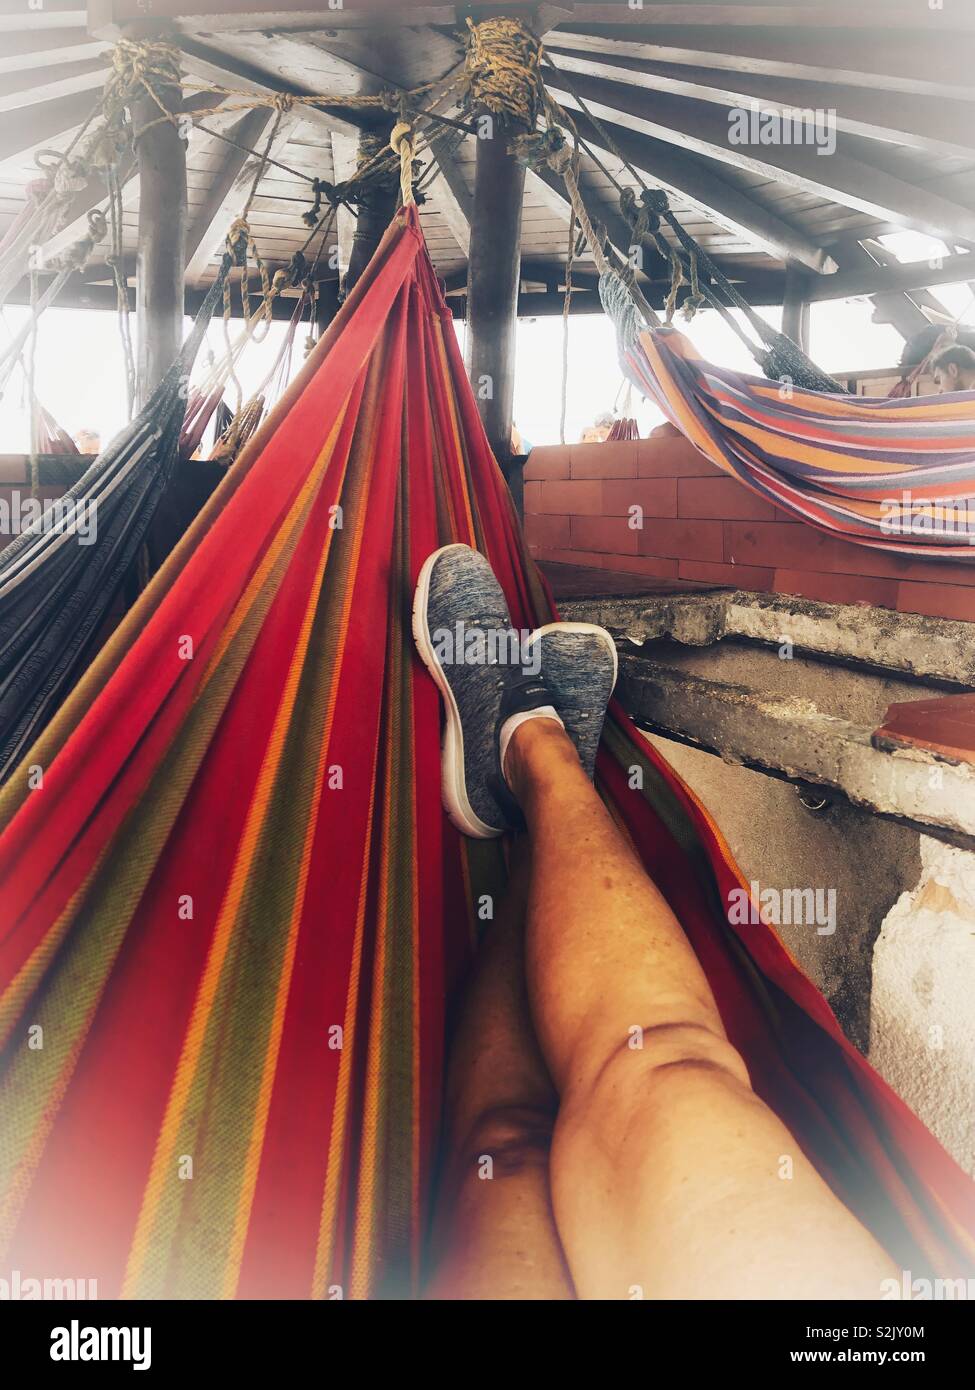 Just hanging around in a colourful hammock. Stock Photo